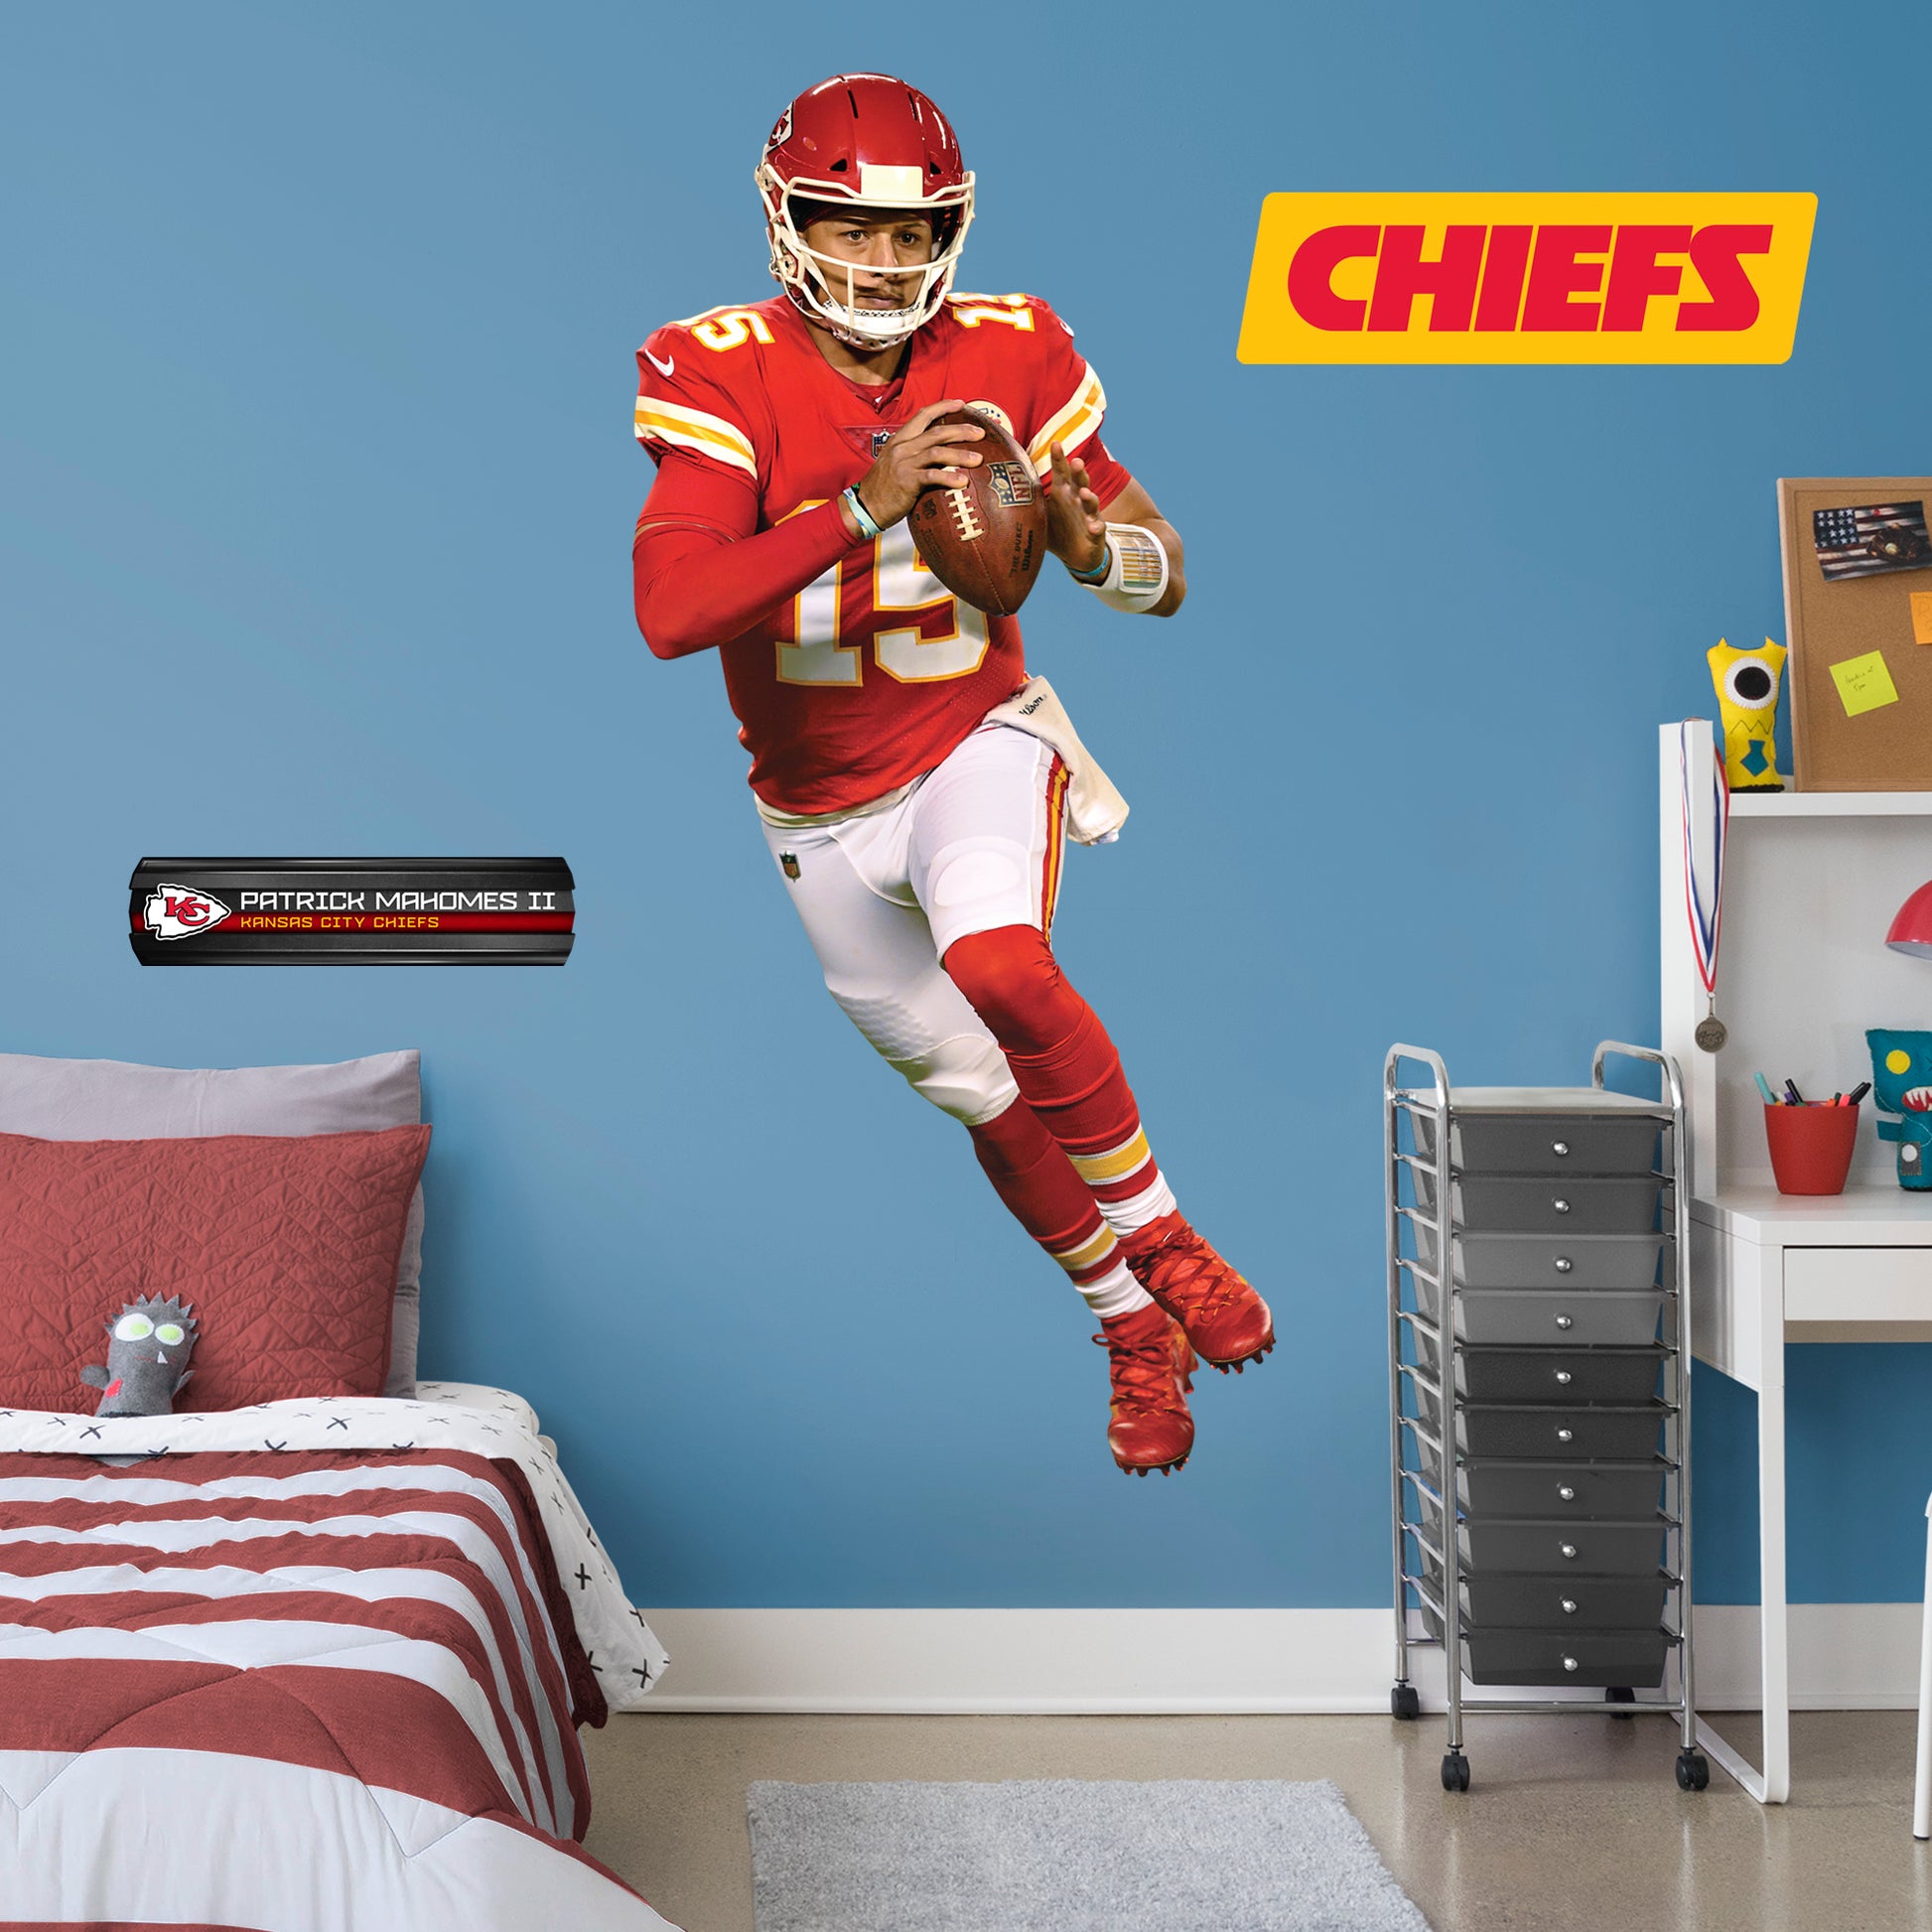 Life-Size Athlete + 2 Decals (40"W x 78"H) Bring the action of the NFL into your home with a wall decal of Patrick Mahomes! High quality, durable, and tear resistant, you'll be able to stick and move it as many times as you want to create the ultimate football experience in any room!